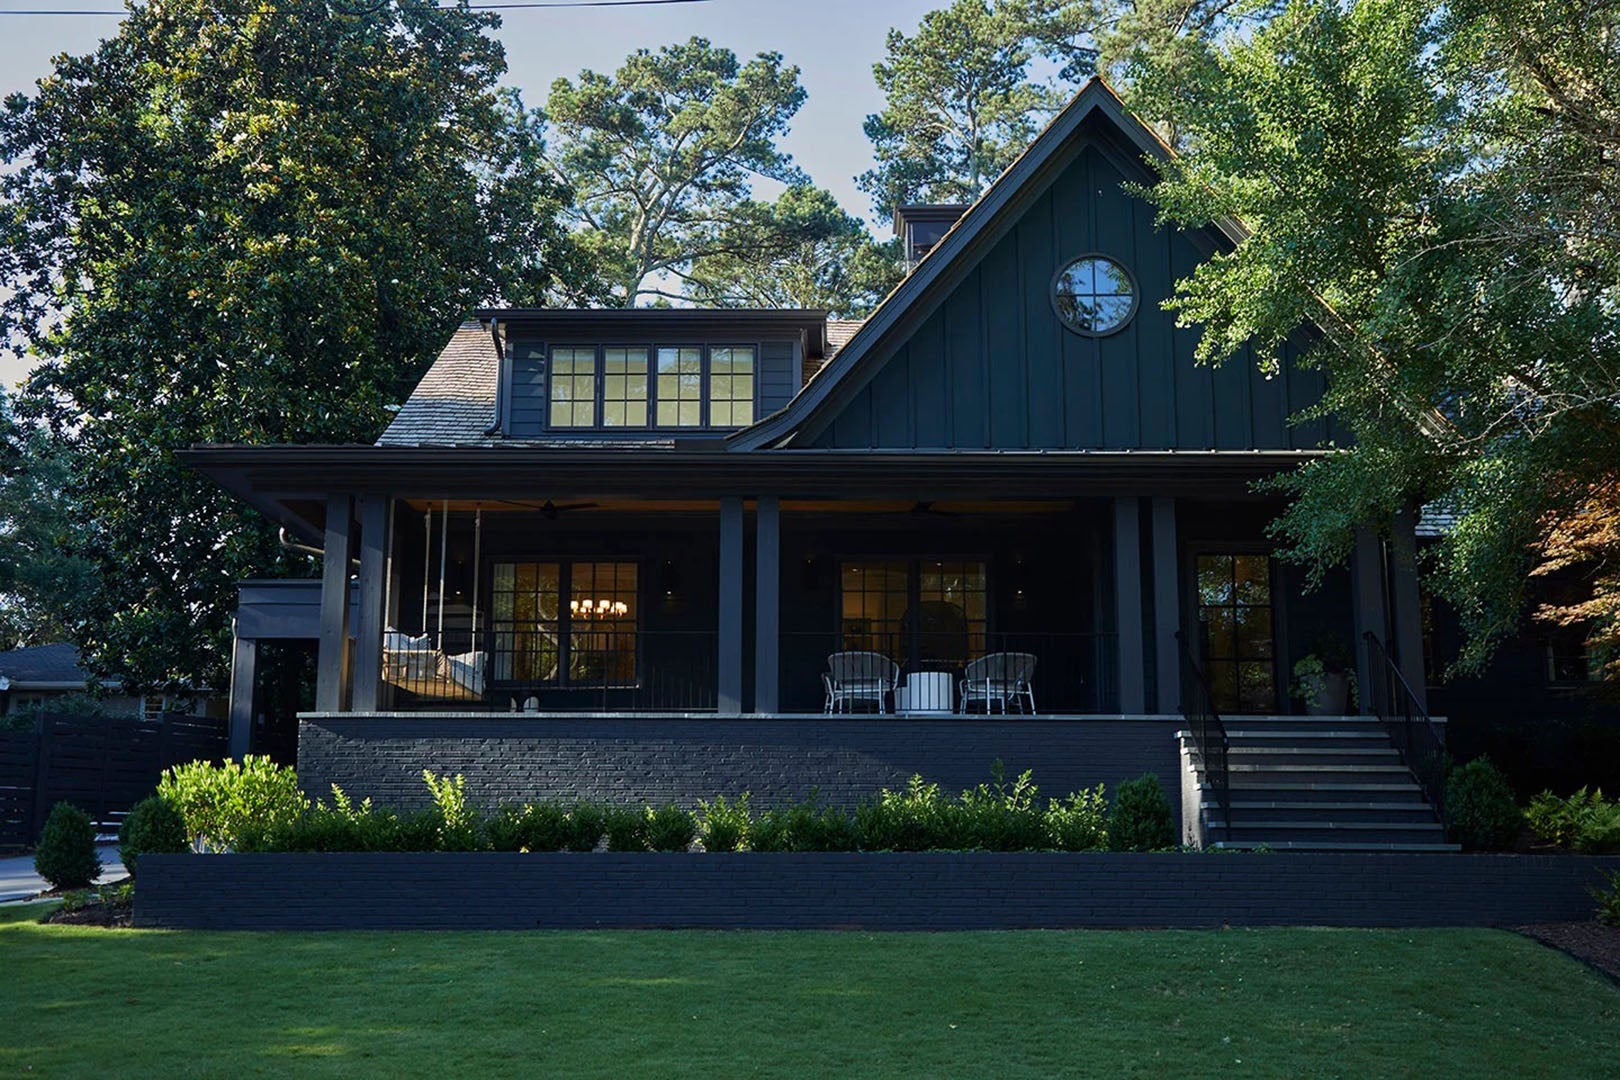 Black exterior house with green lawn.